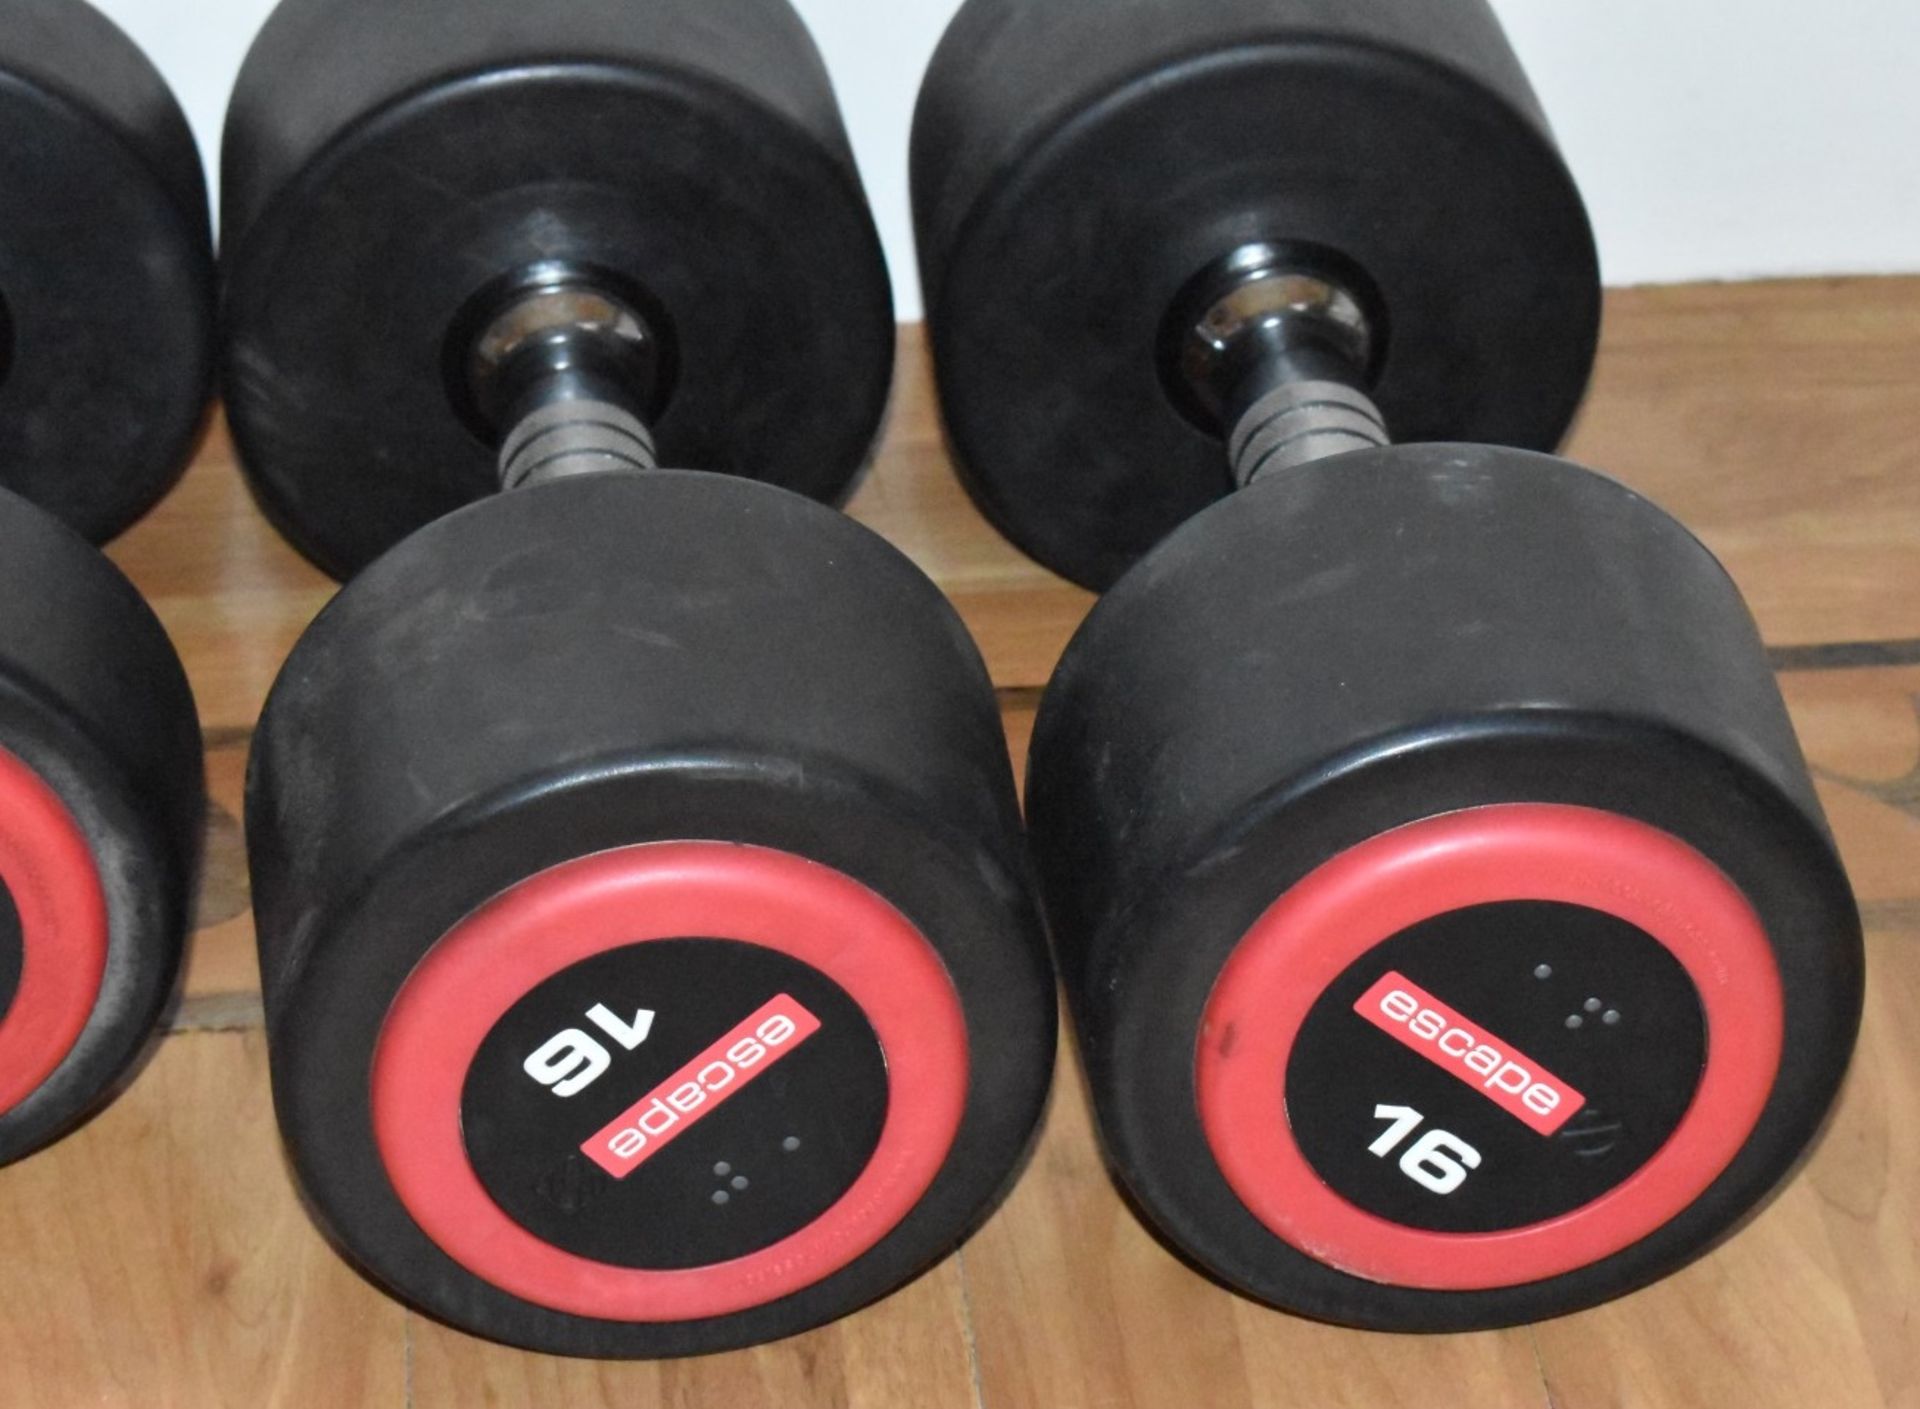 3 x Sets of Escape Polyurethane Dumbell Weights - Includes Pairs of 10kg, 16kg and 20kg Dumbells - 6 - Image 4 of 5